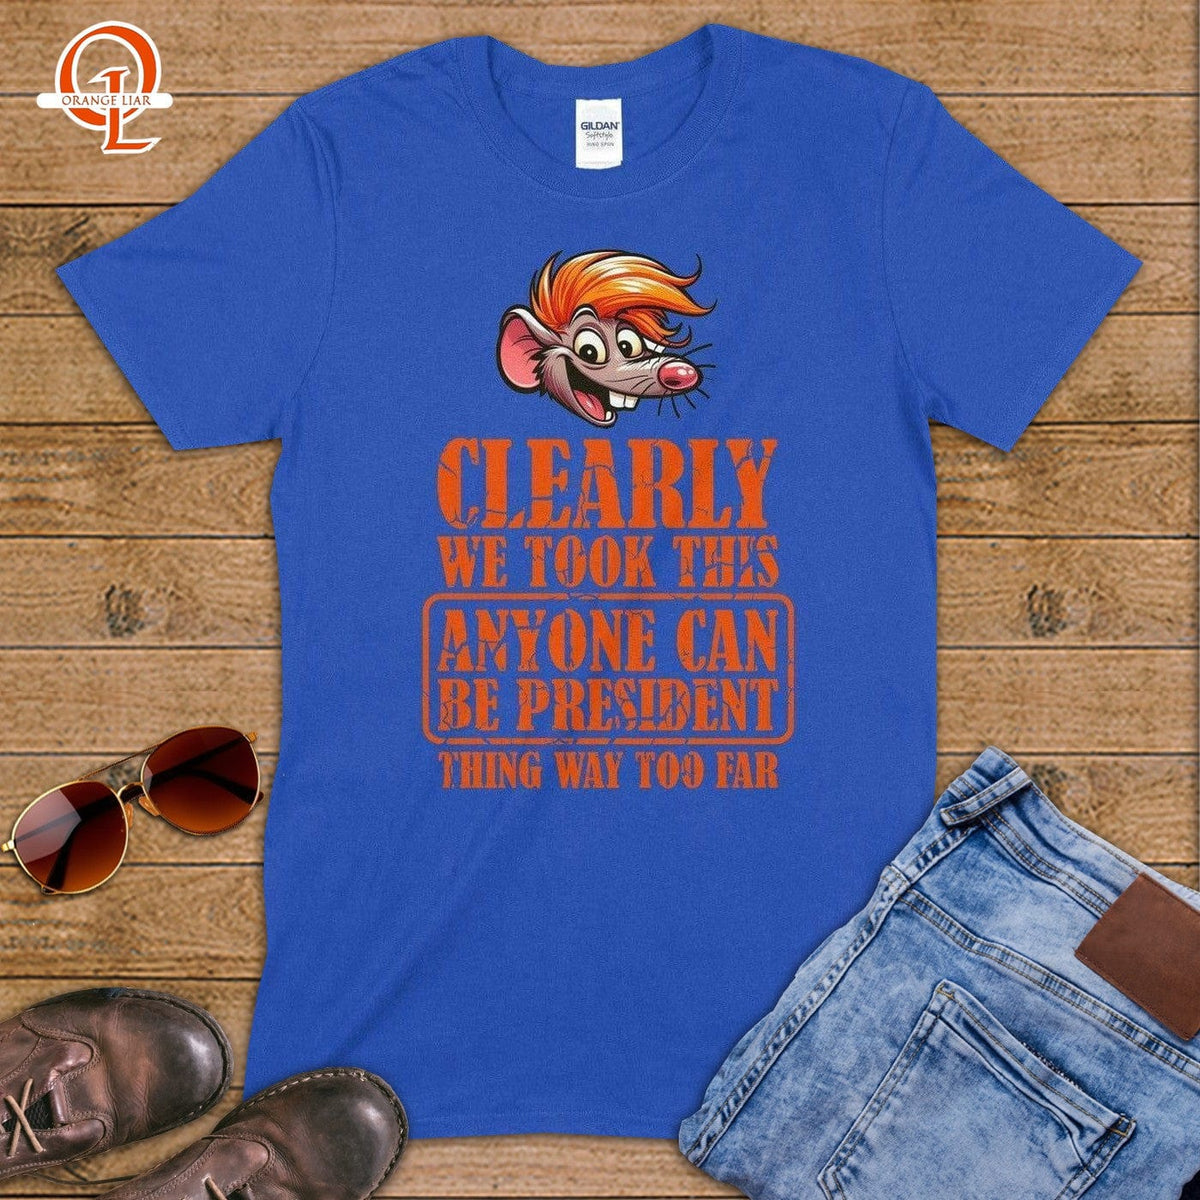 Clearly We Took This "Anyone Can Be President" Thing Way Too Far ~ T-Shirt-Orange Liar